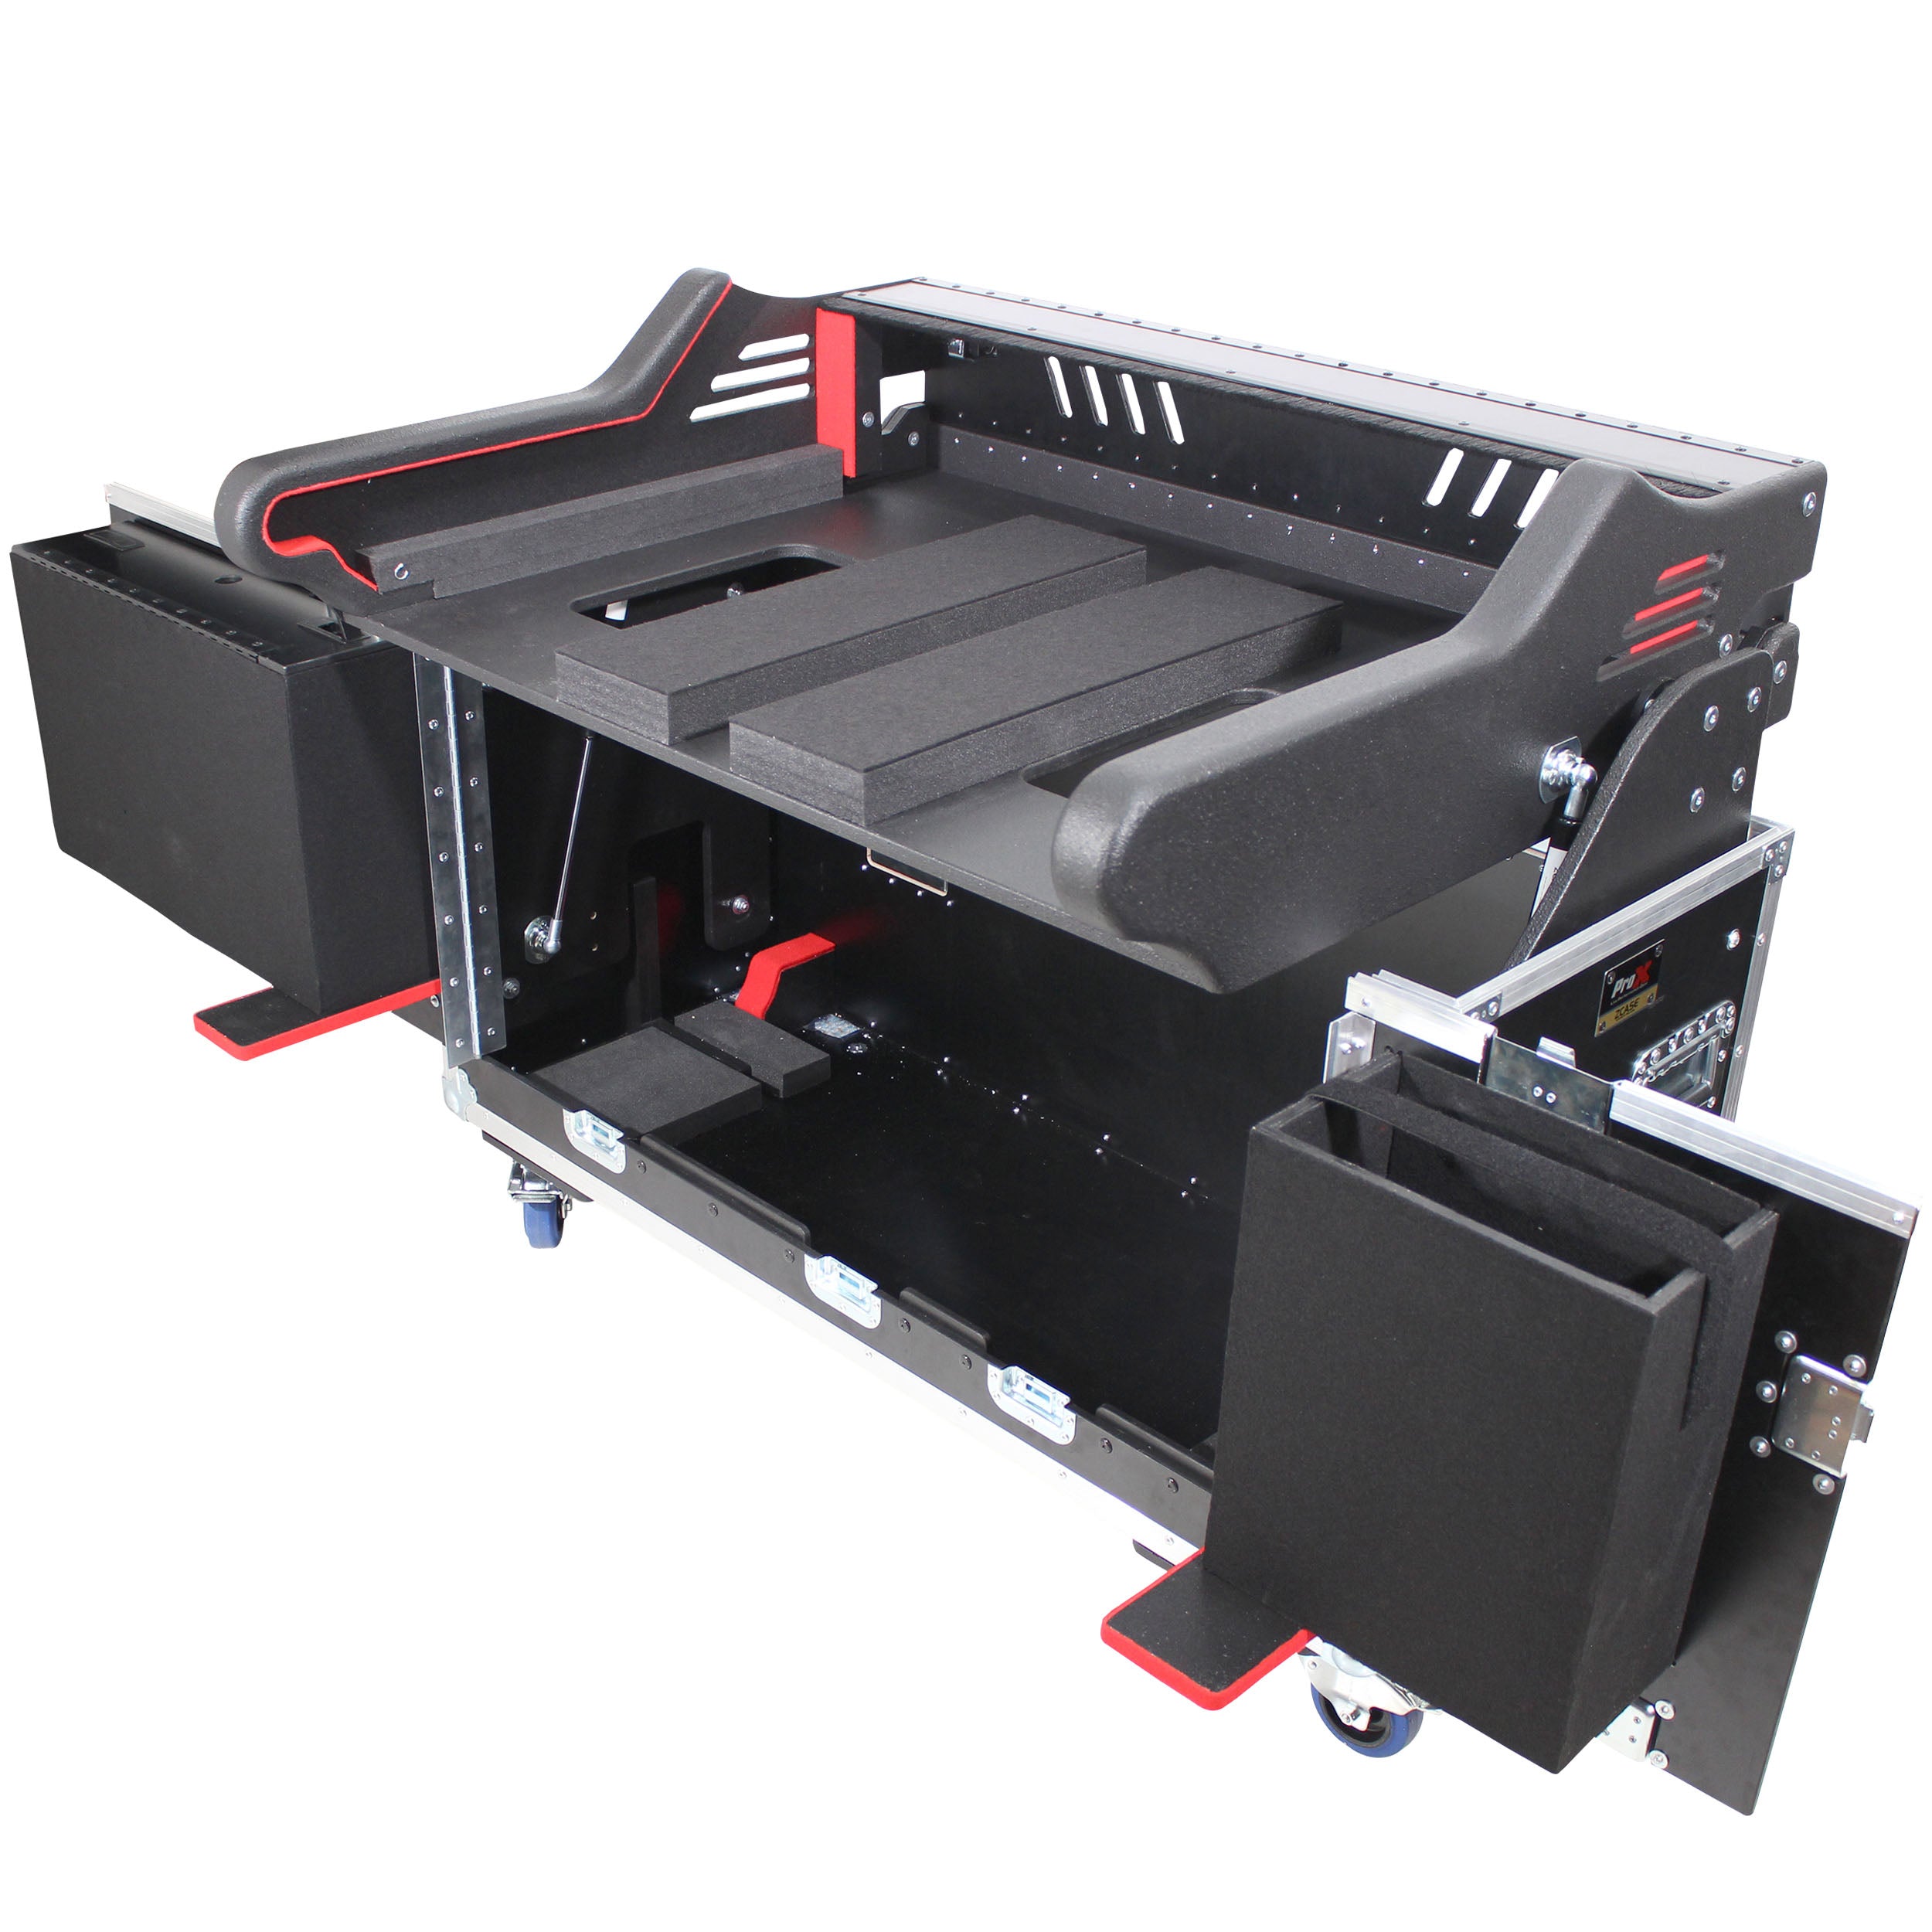 Pro X For MIDAS Heritage D Flip-Ready Hydraulic Console Easy Retracting Lifting 2U Rack Space Case by Zcase HD96-24 XZF-MID-HD2ULMA